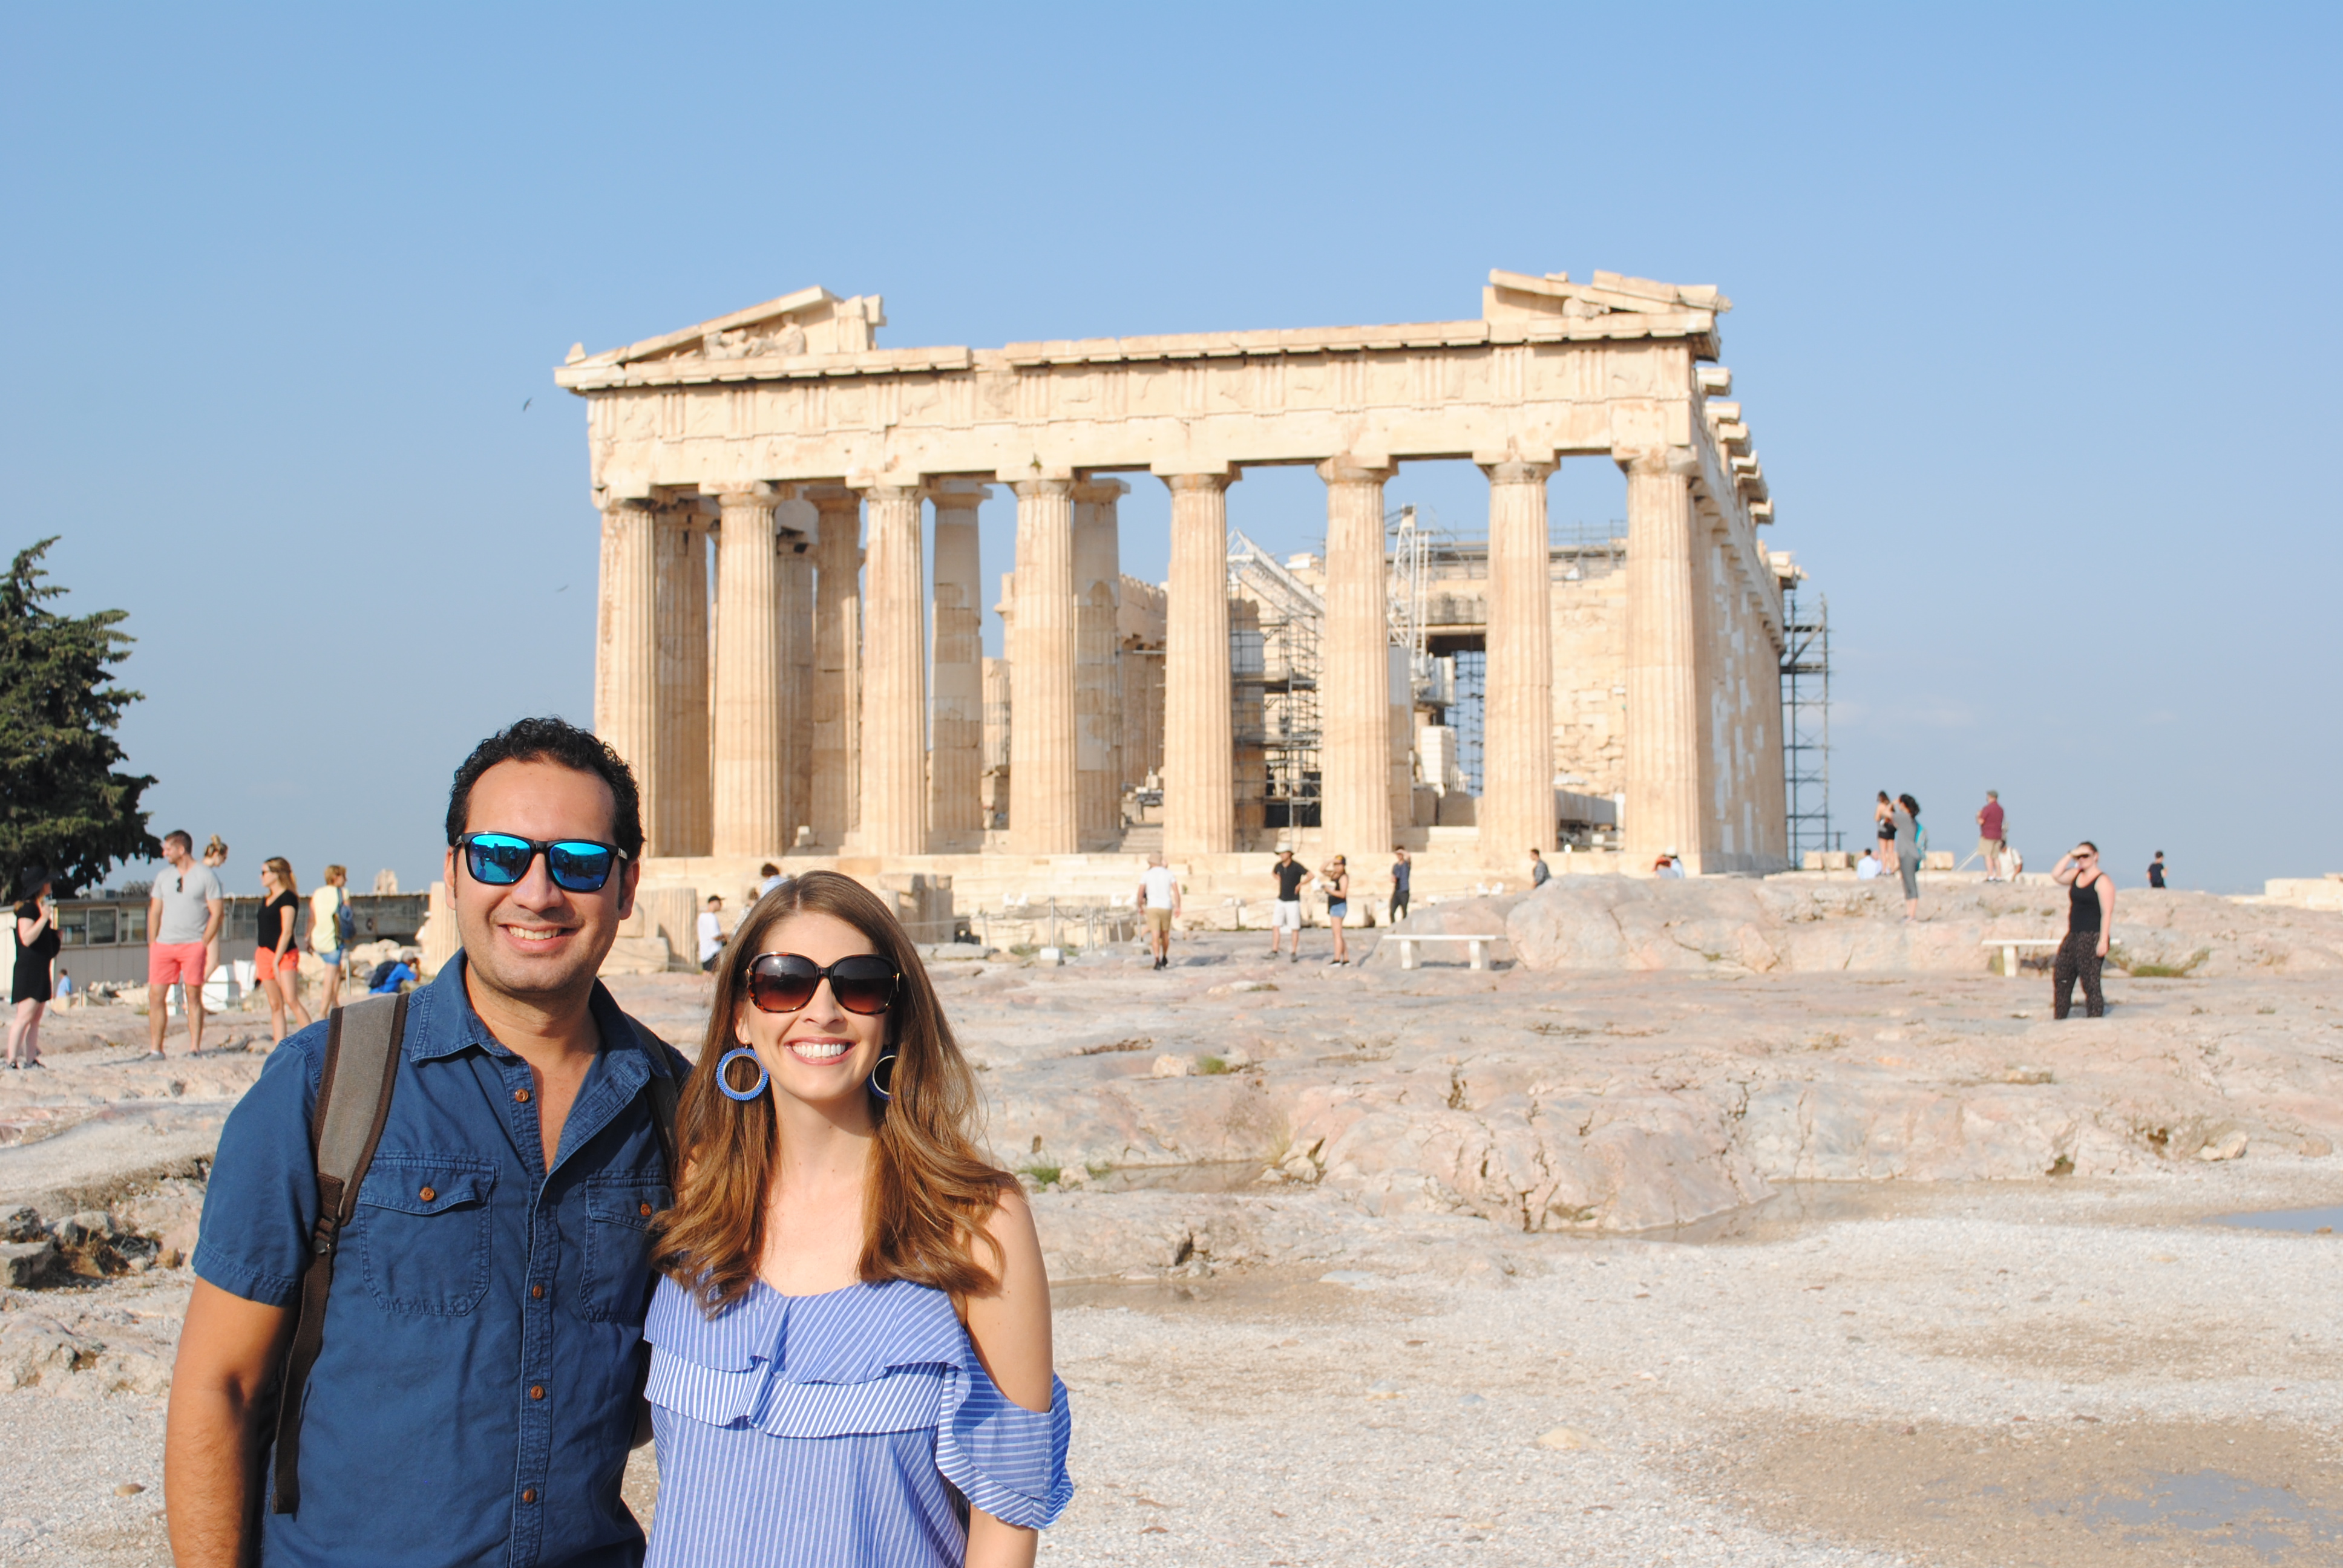 Exploring the Acropolis is the number one thing you must do in Athens, Greece